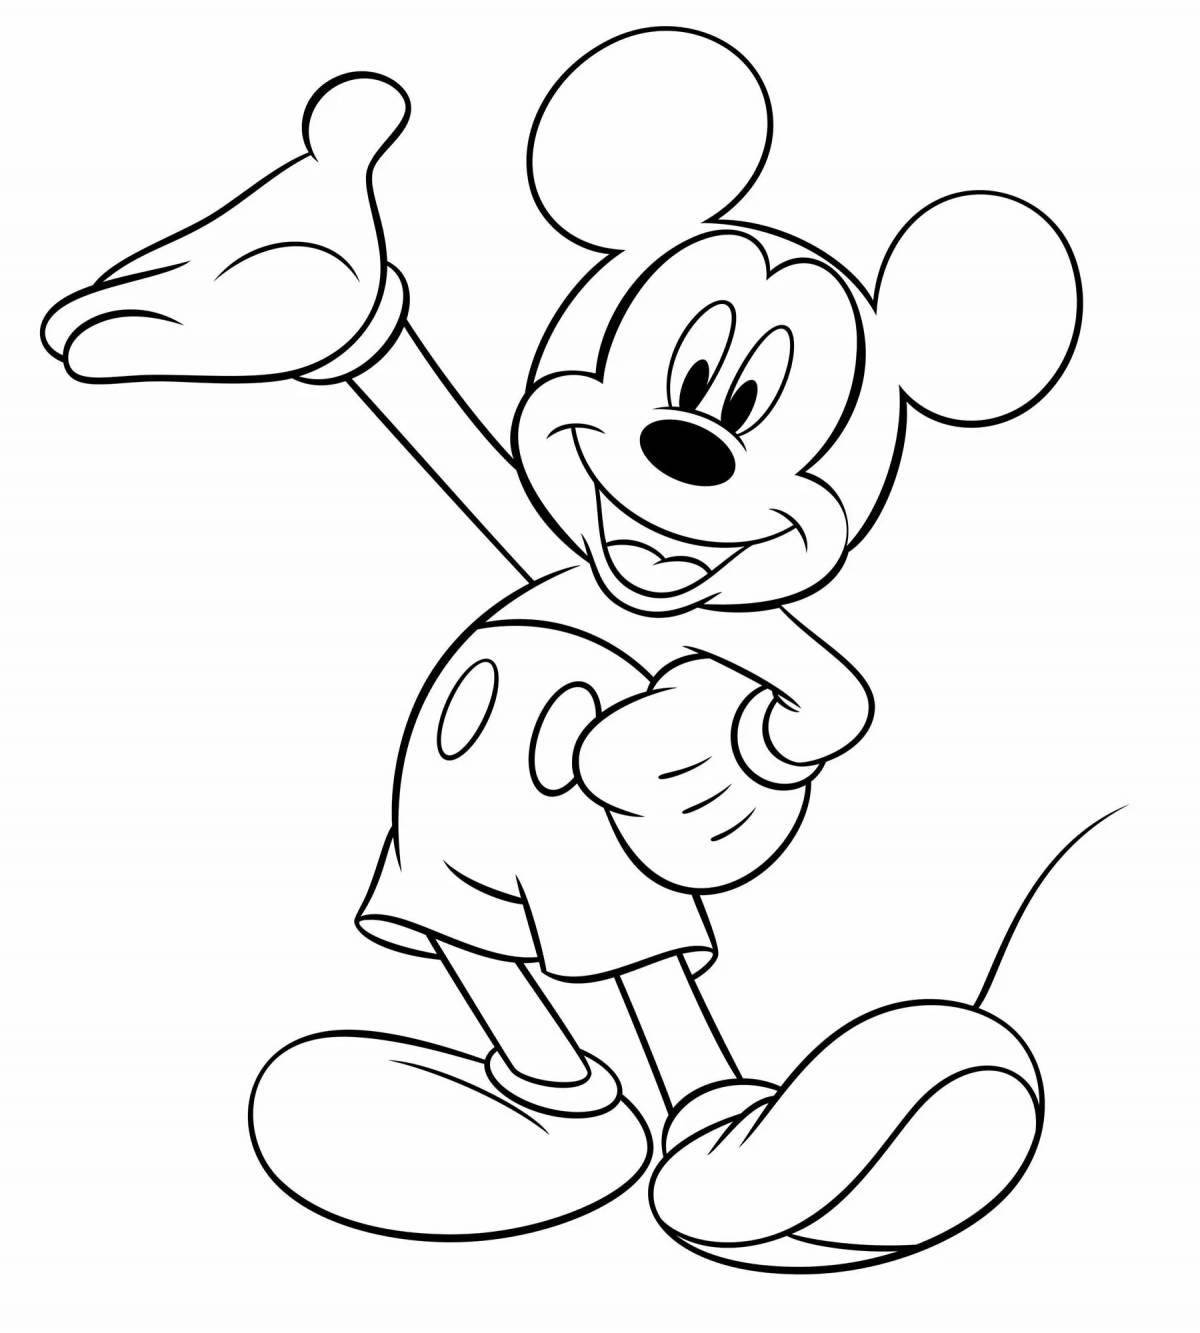 Glitter cartoon characters coloring book for kids